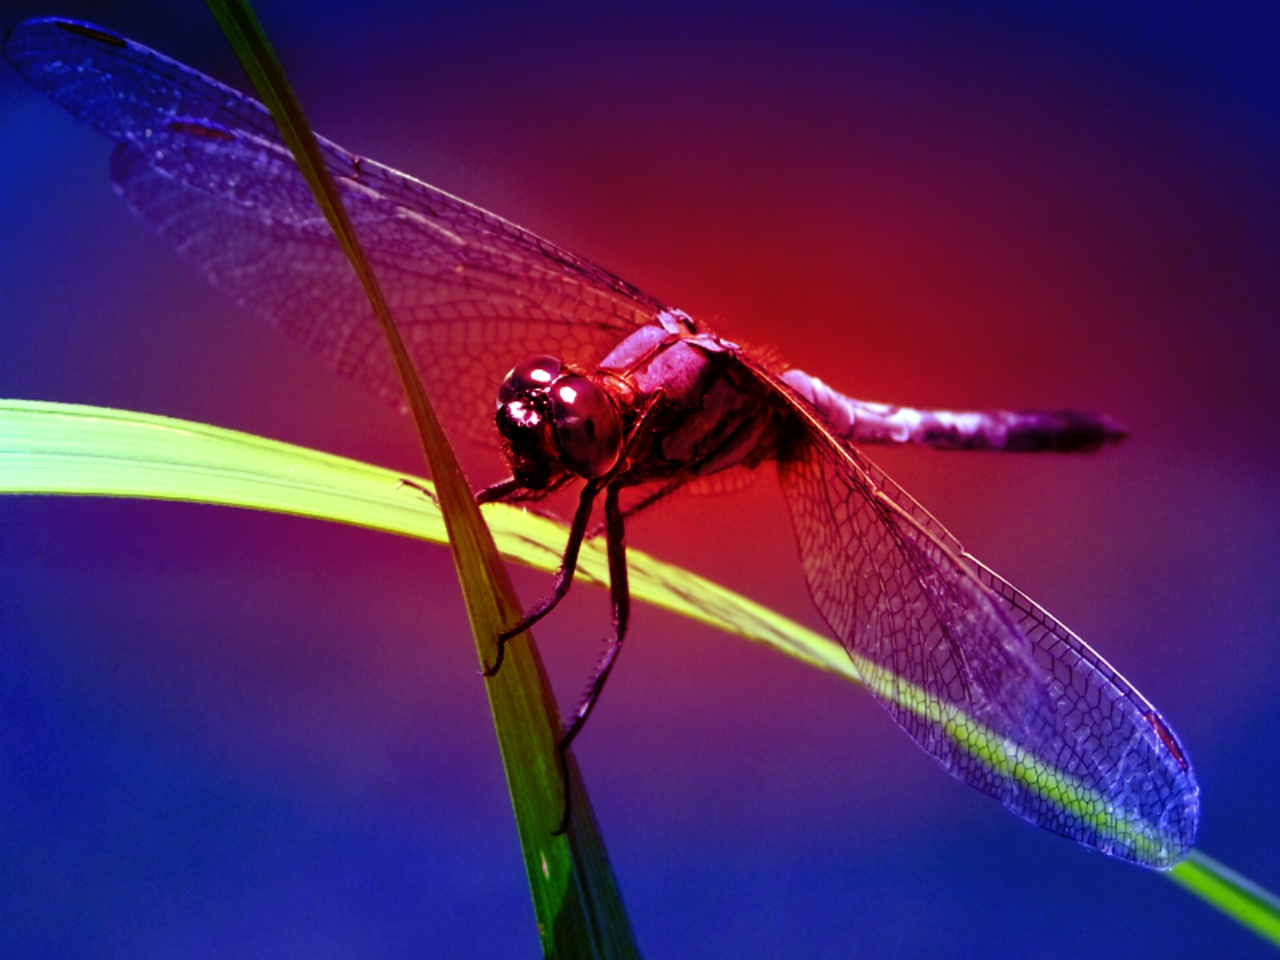 Dragonfly Image For Timeline Cover